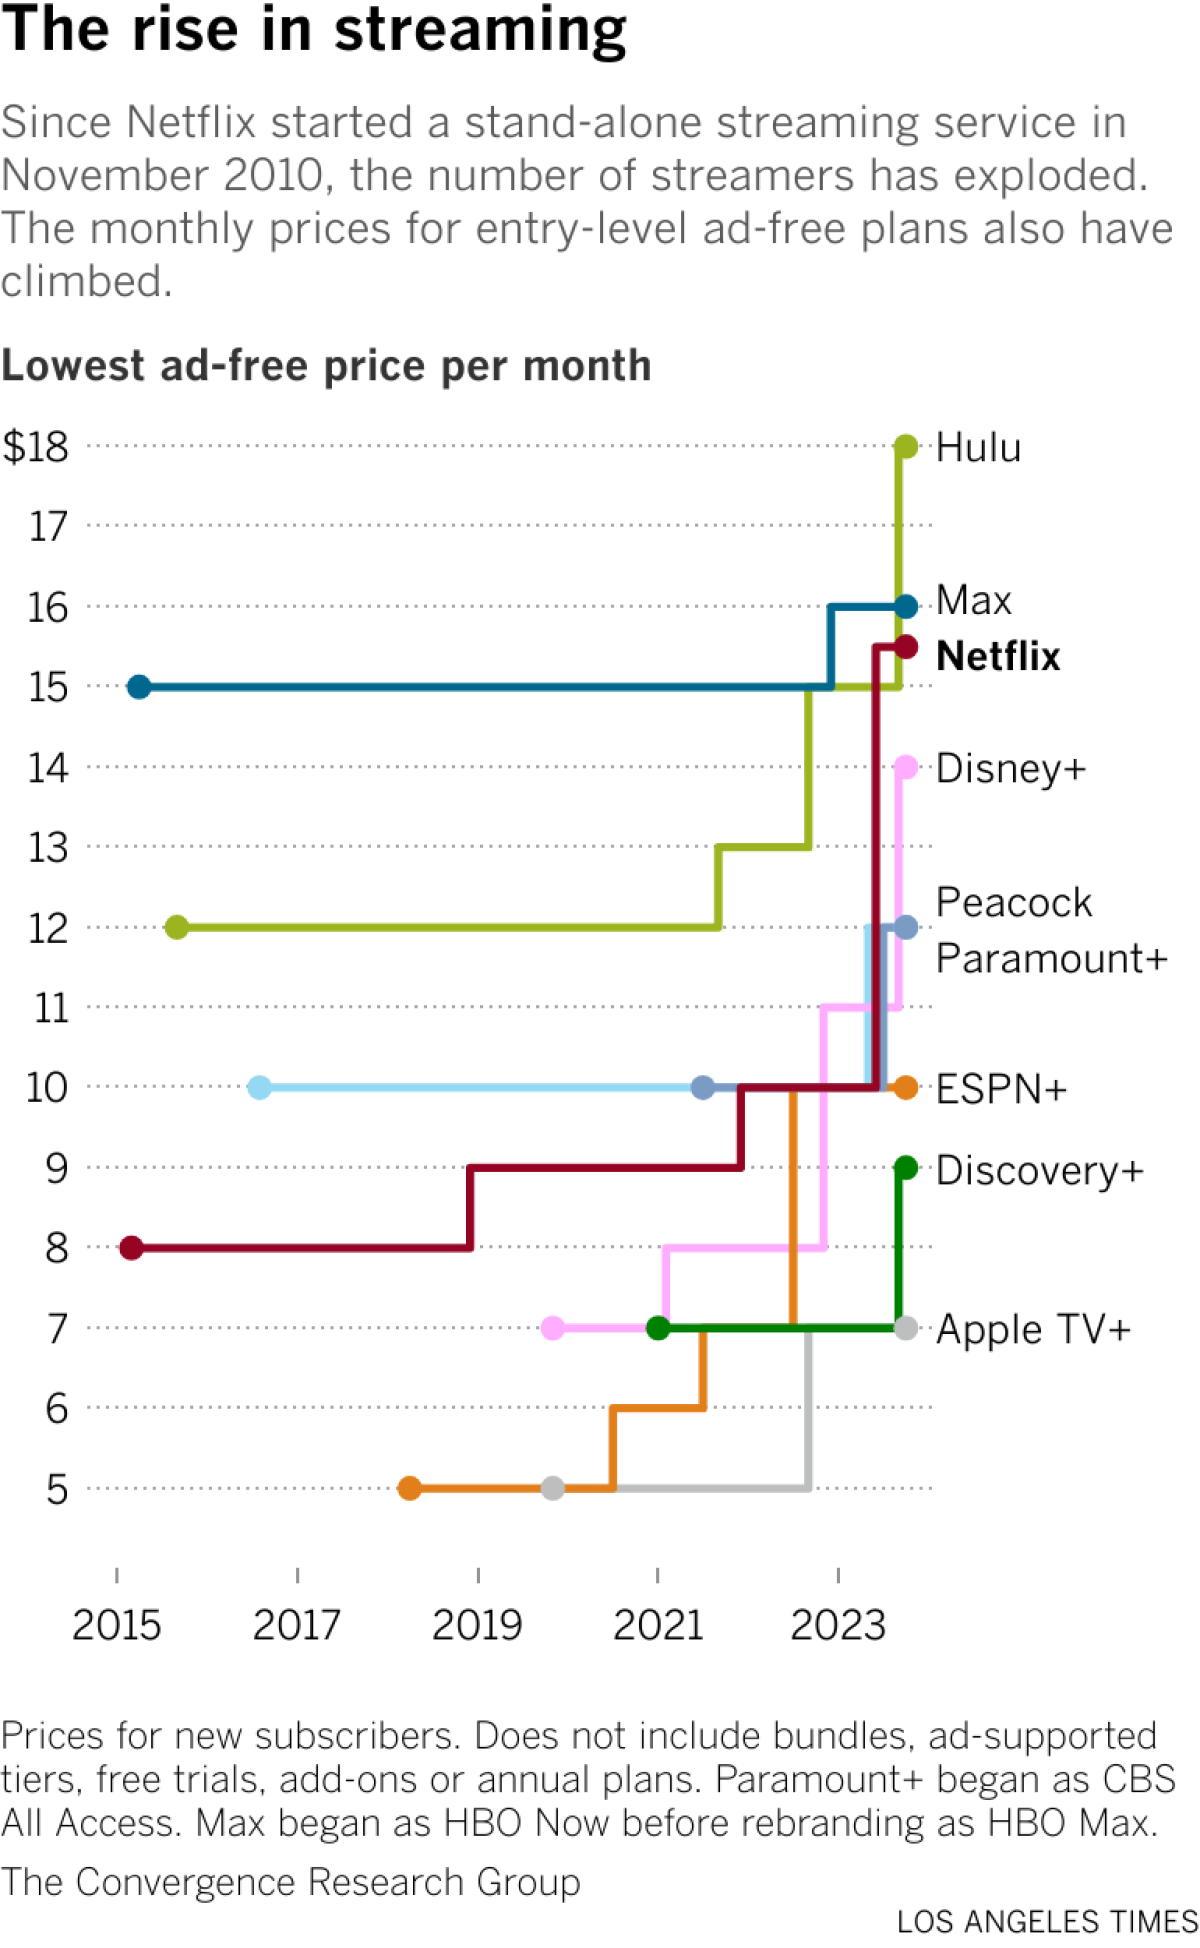 Since Netflix started a stand-alone streaming service in November 2010, the number of streamers have exploded. The monthly prices for entry-level ad-free plans have also climbed.